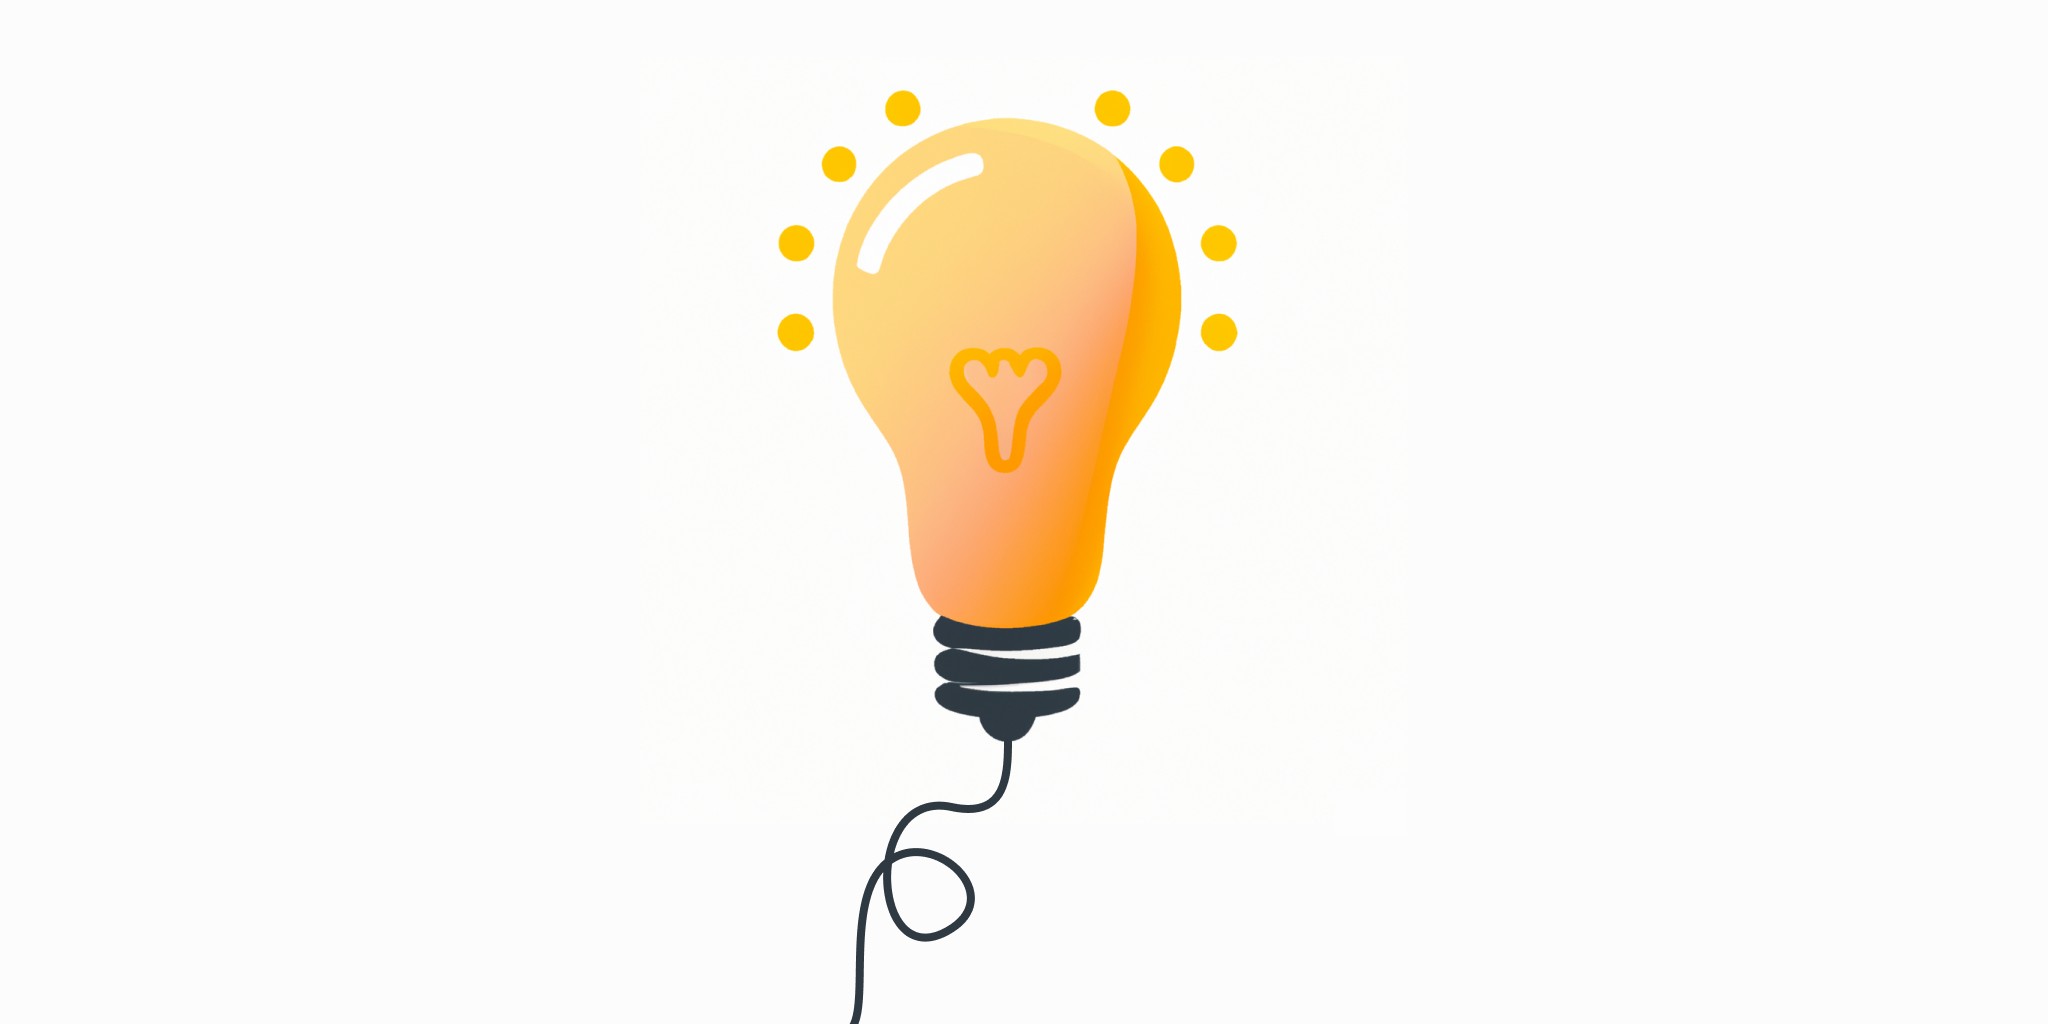 balloon in the shape of a lightbulb in flat illustration style with gradients and white background